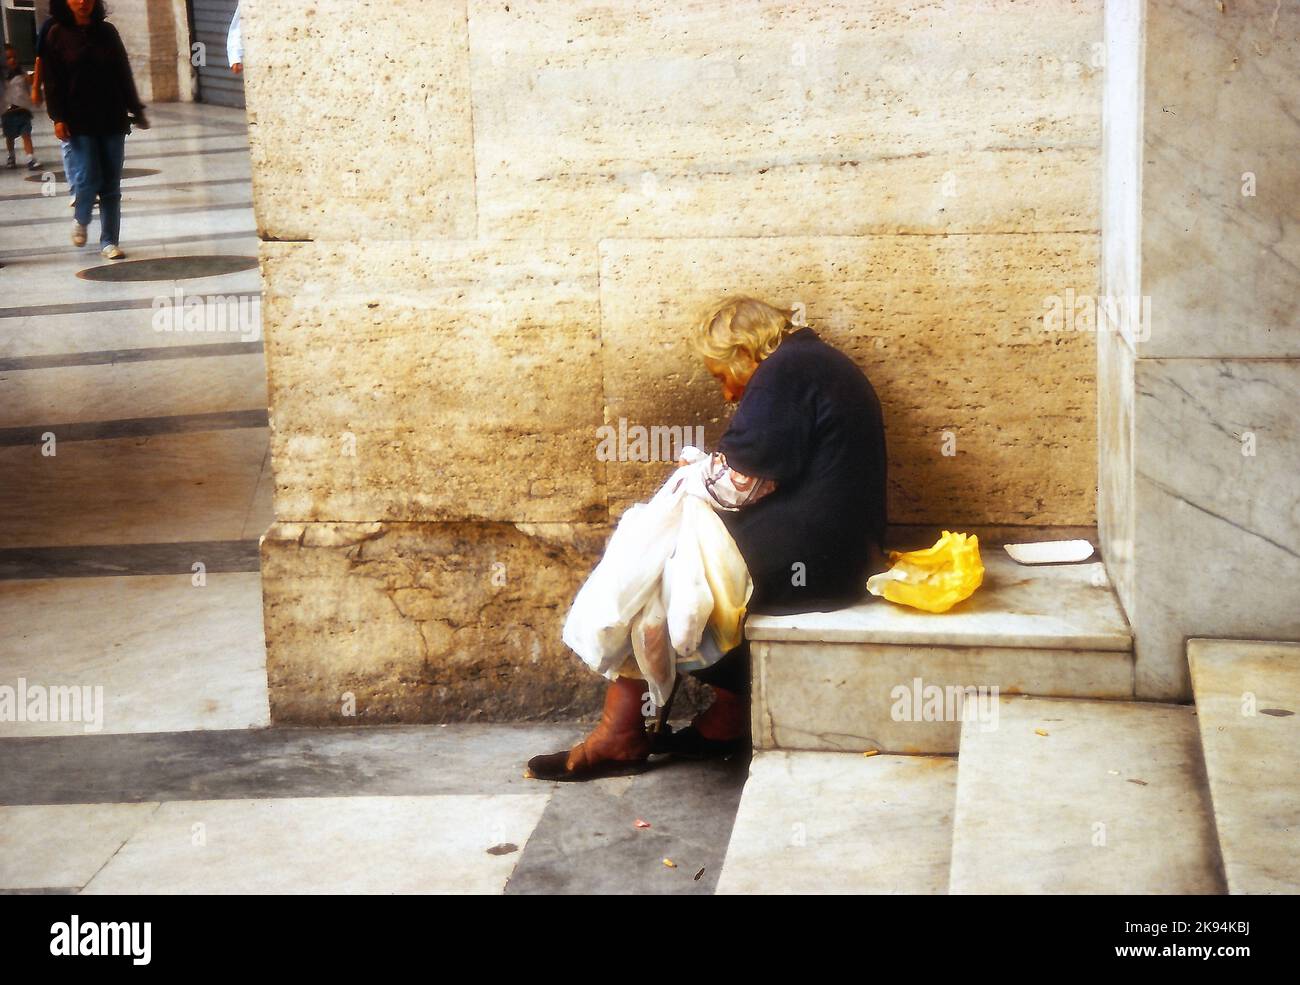 Naples 1985, an old homeless woman sleeps on the steps of the Galleria Umberto Primo, an important shopping gallery. Stock Photo